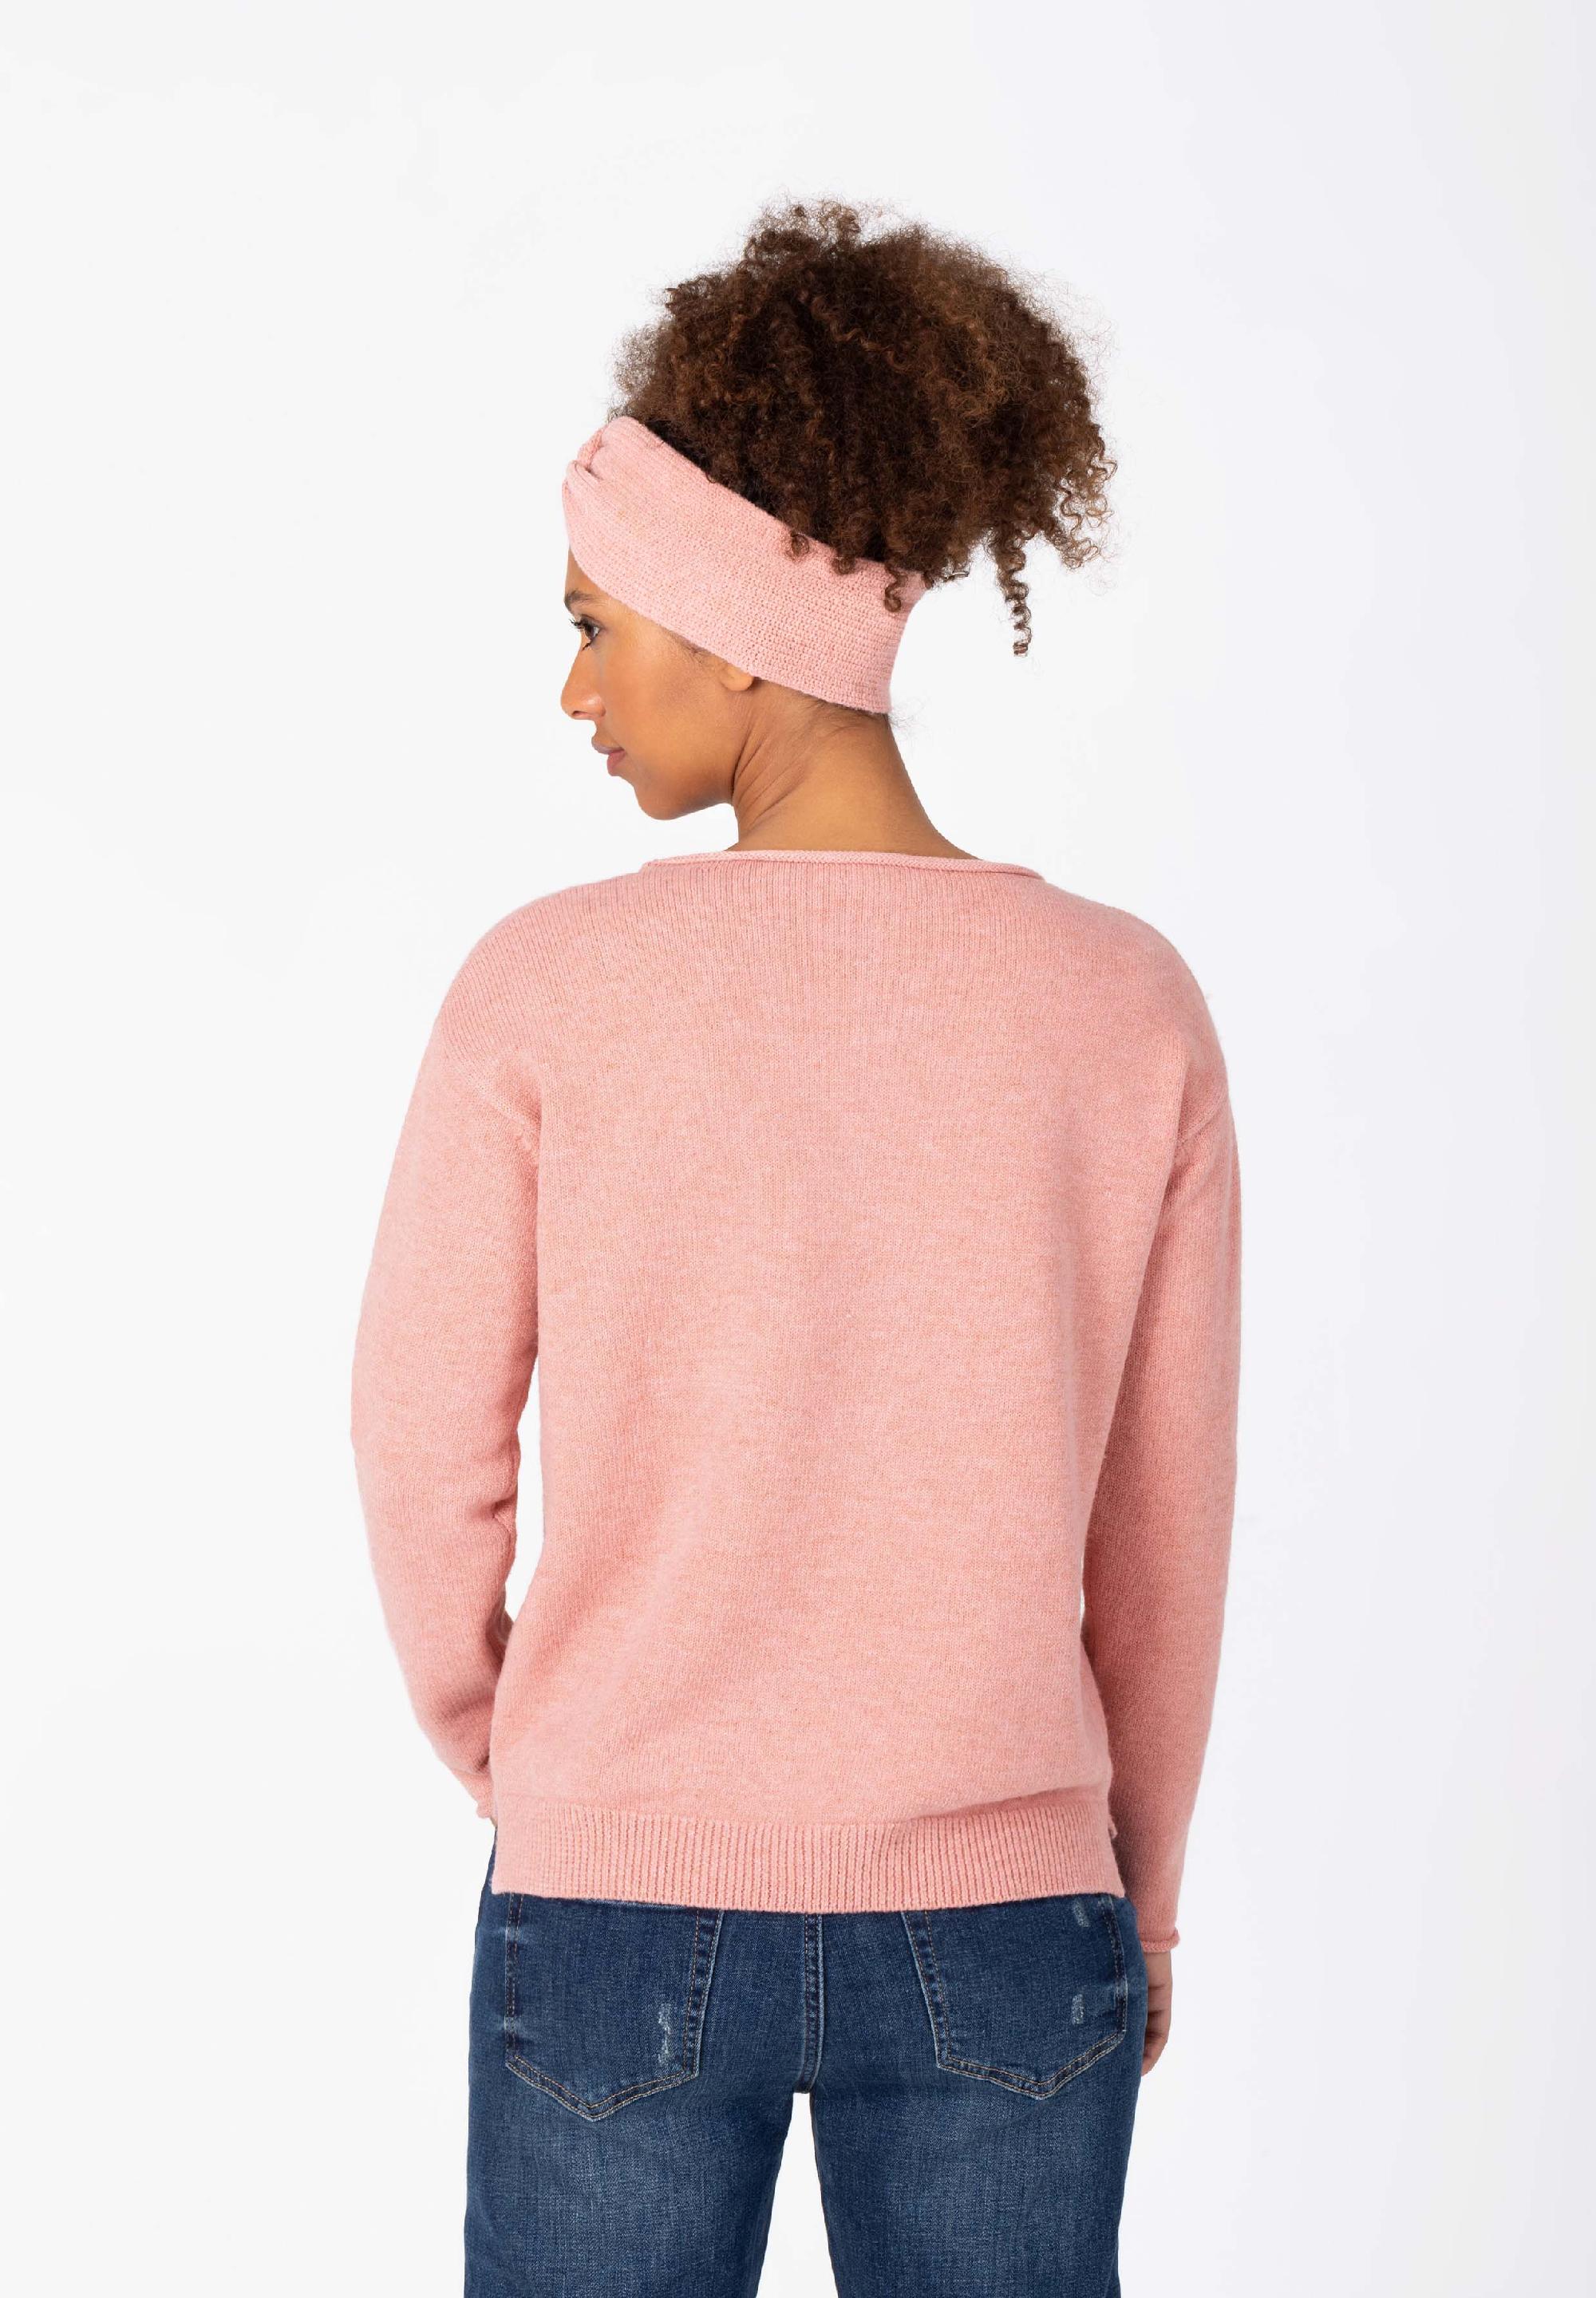 Fancy Knit Pullover decoration